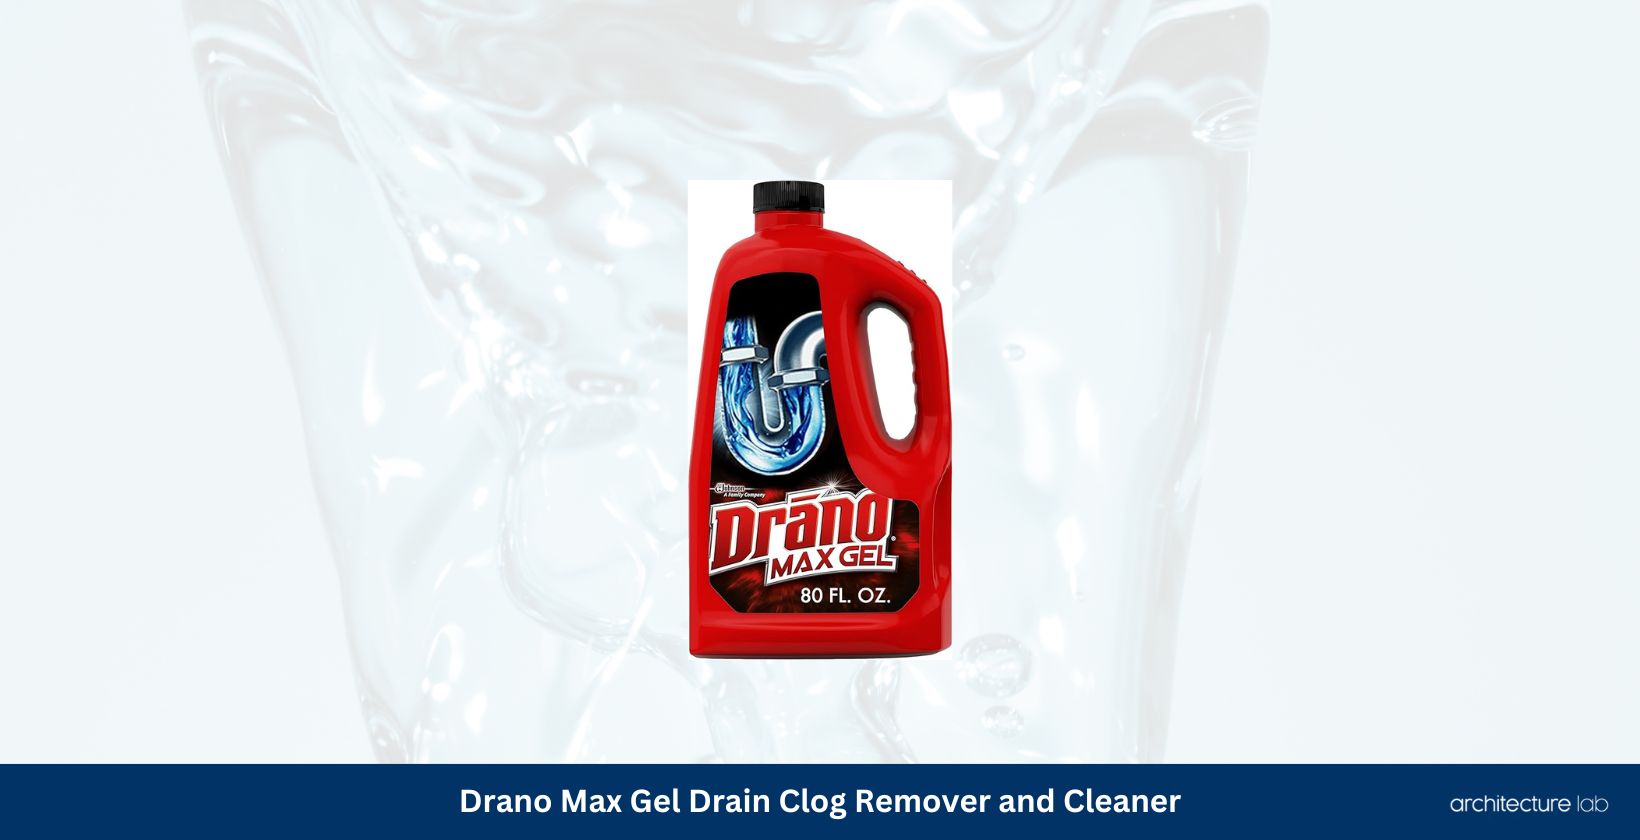 Drano max gel drain clog remover and cleaner